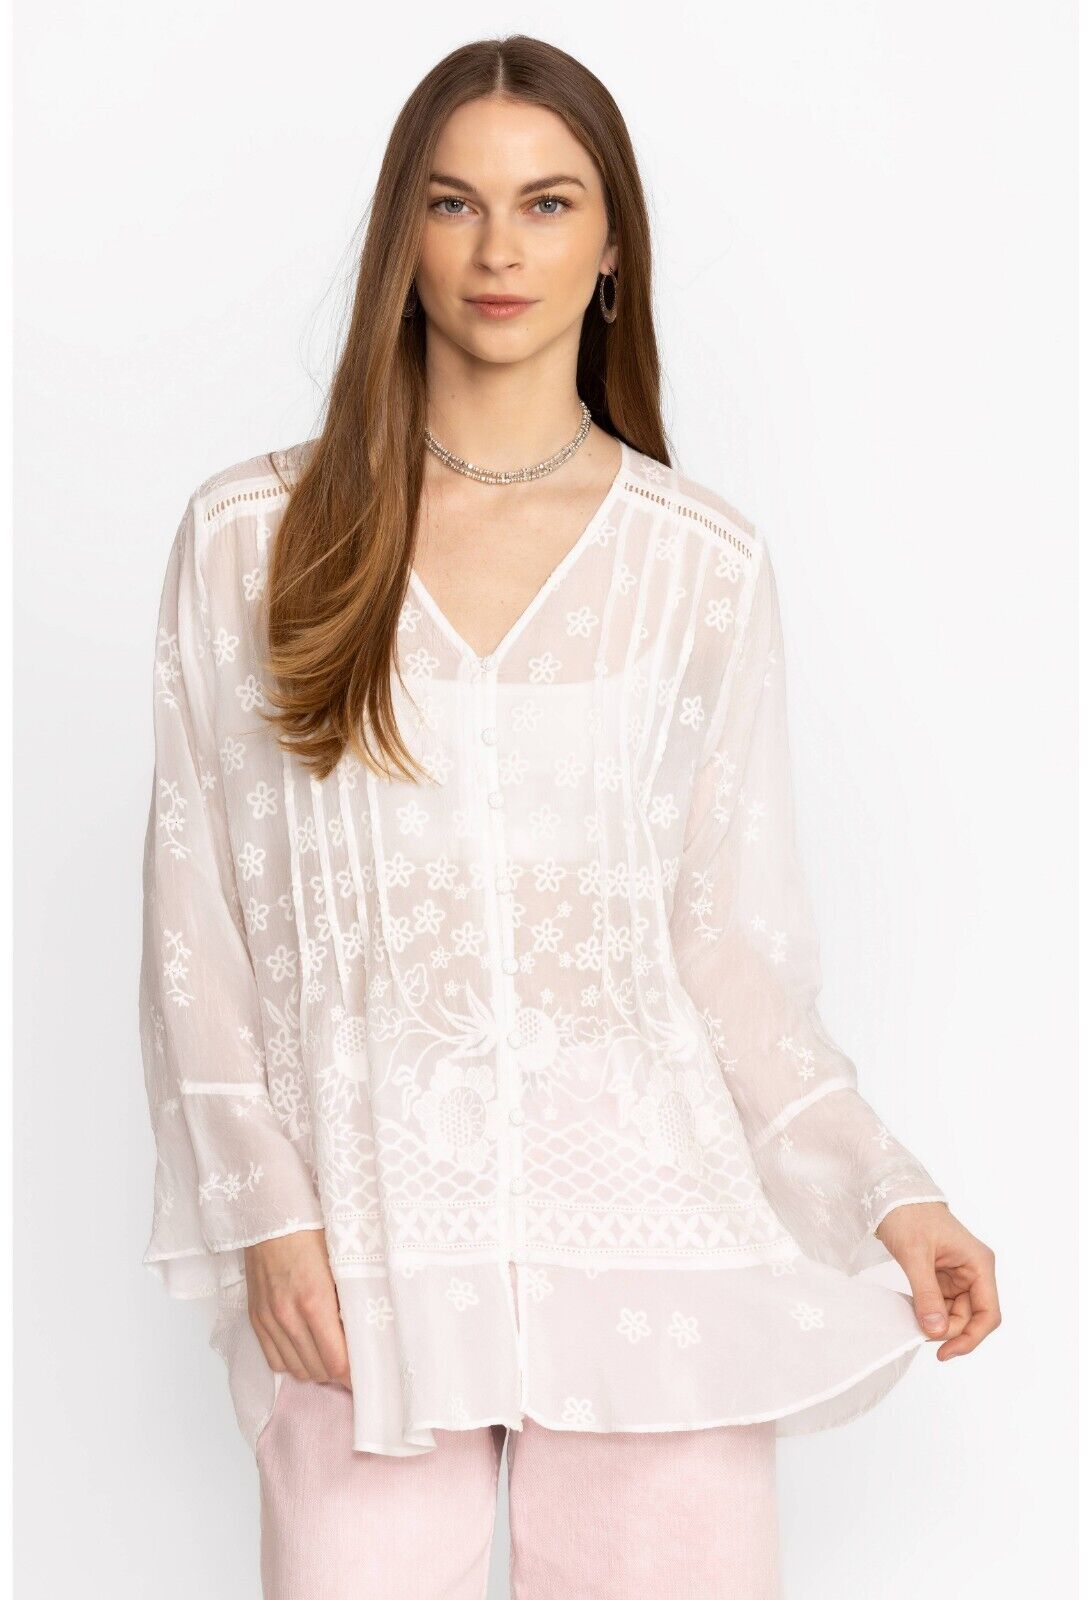 Brand NEW NWT Johnny Was FLEUR DU JOUR TUNIC  COLOR: White Size ALL